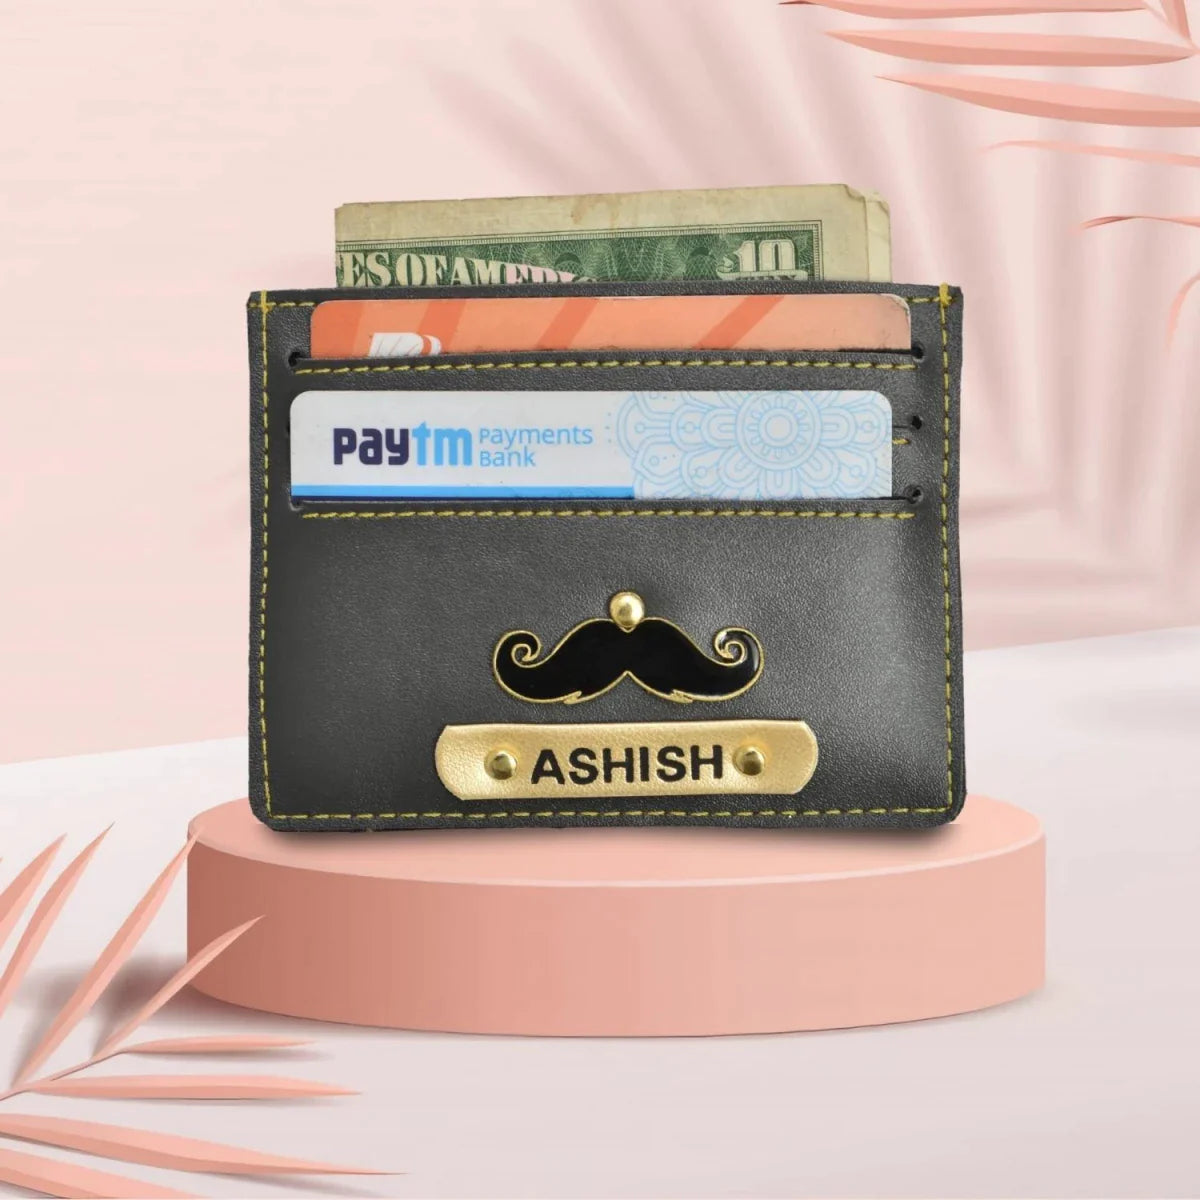 With our personalized unisex card wallet, you can keep your cards organized while showing off your unique style.